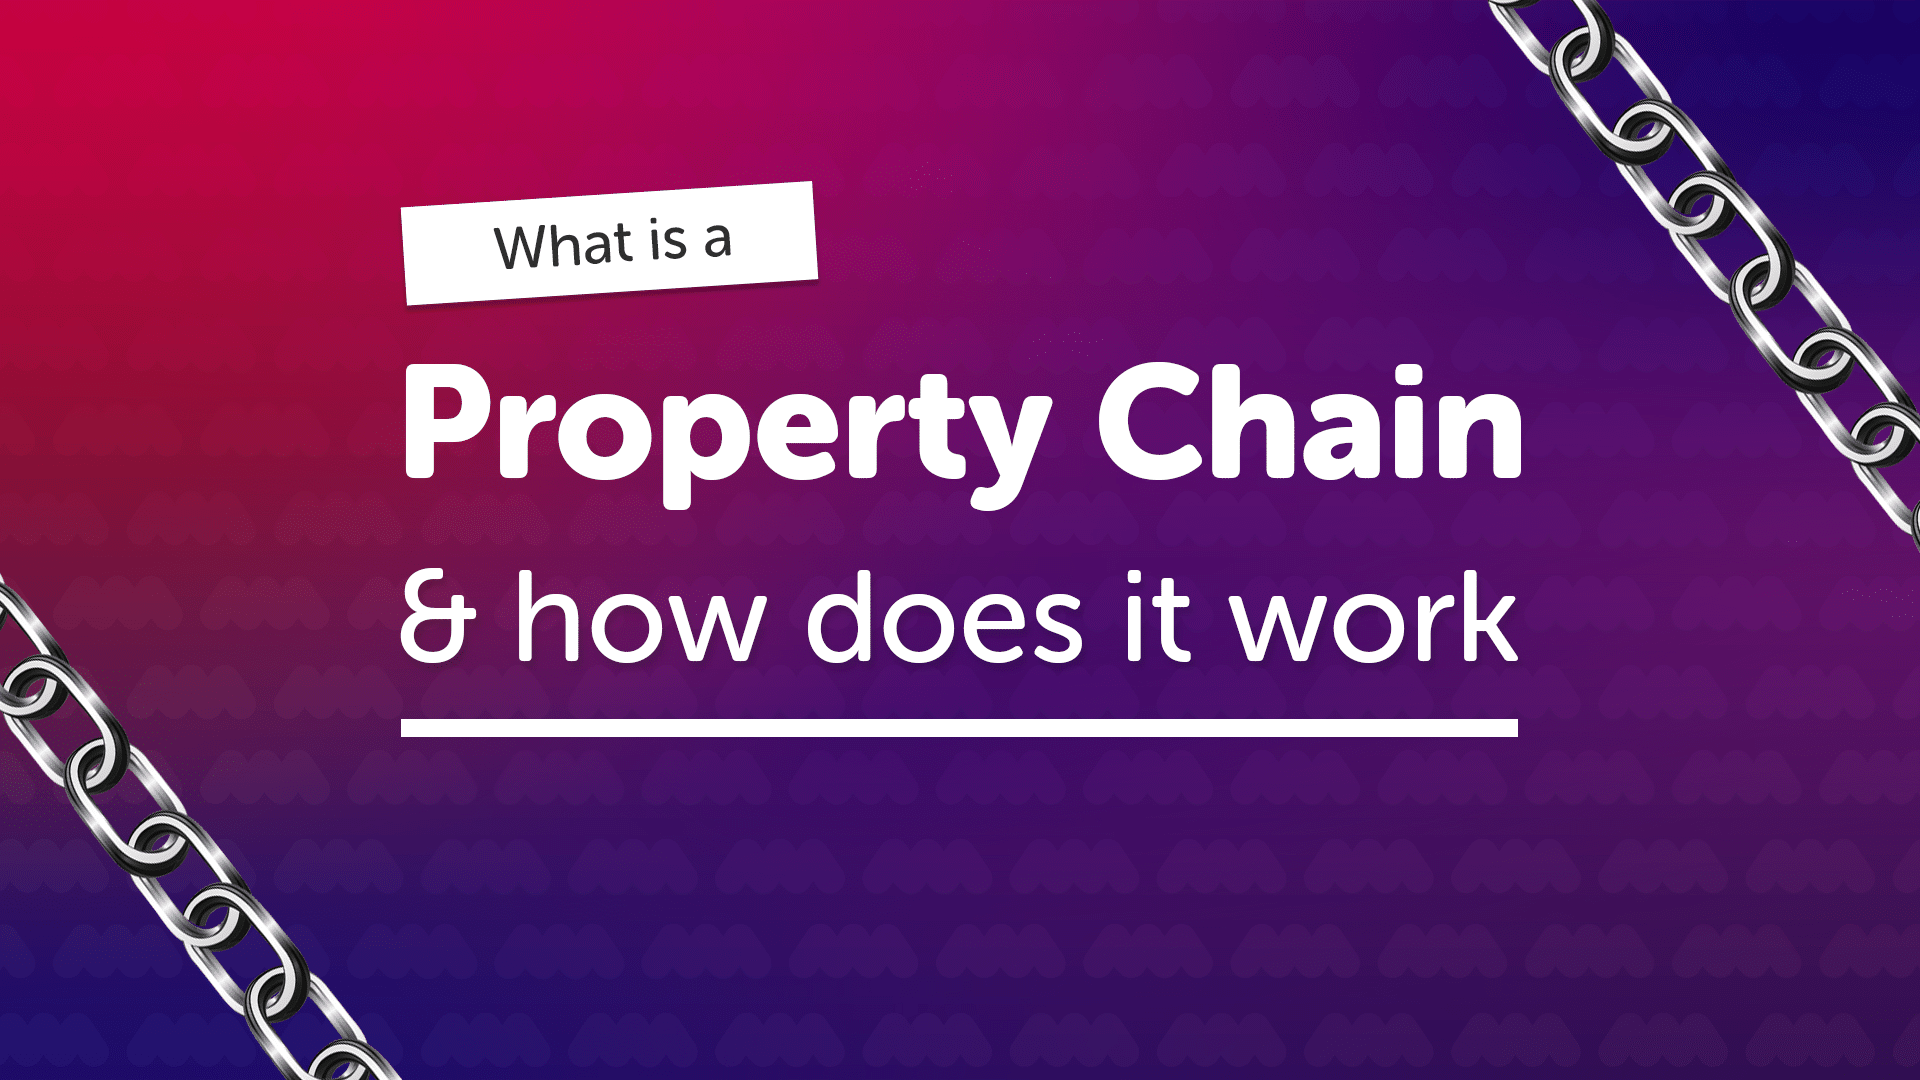 What is a Property Chain in Leeds